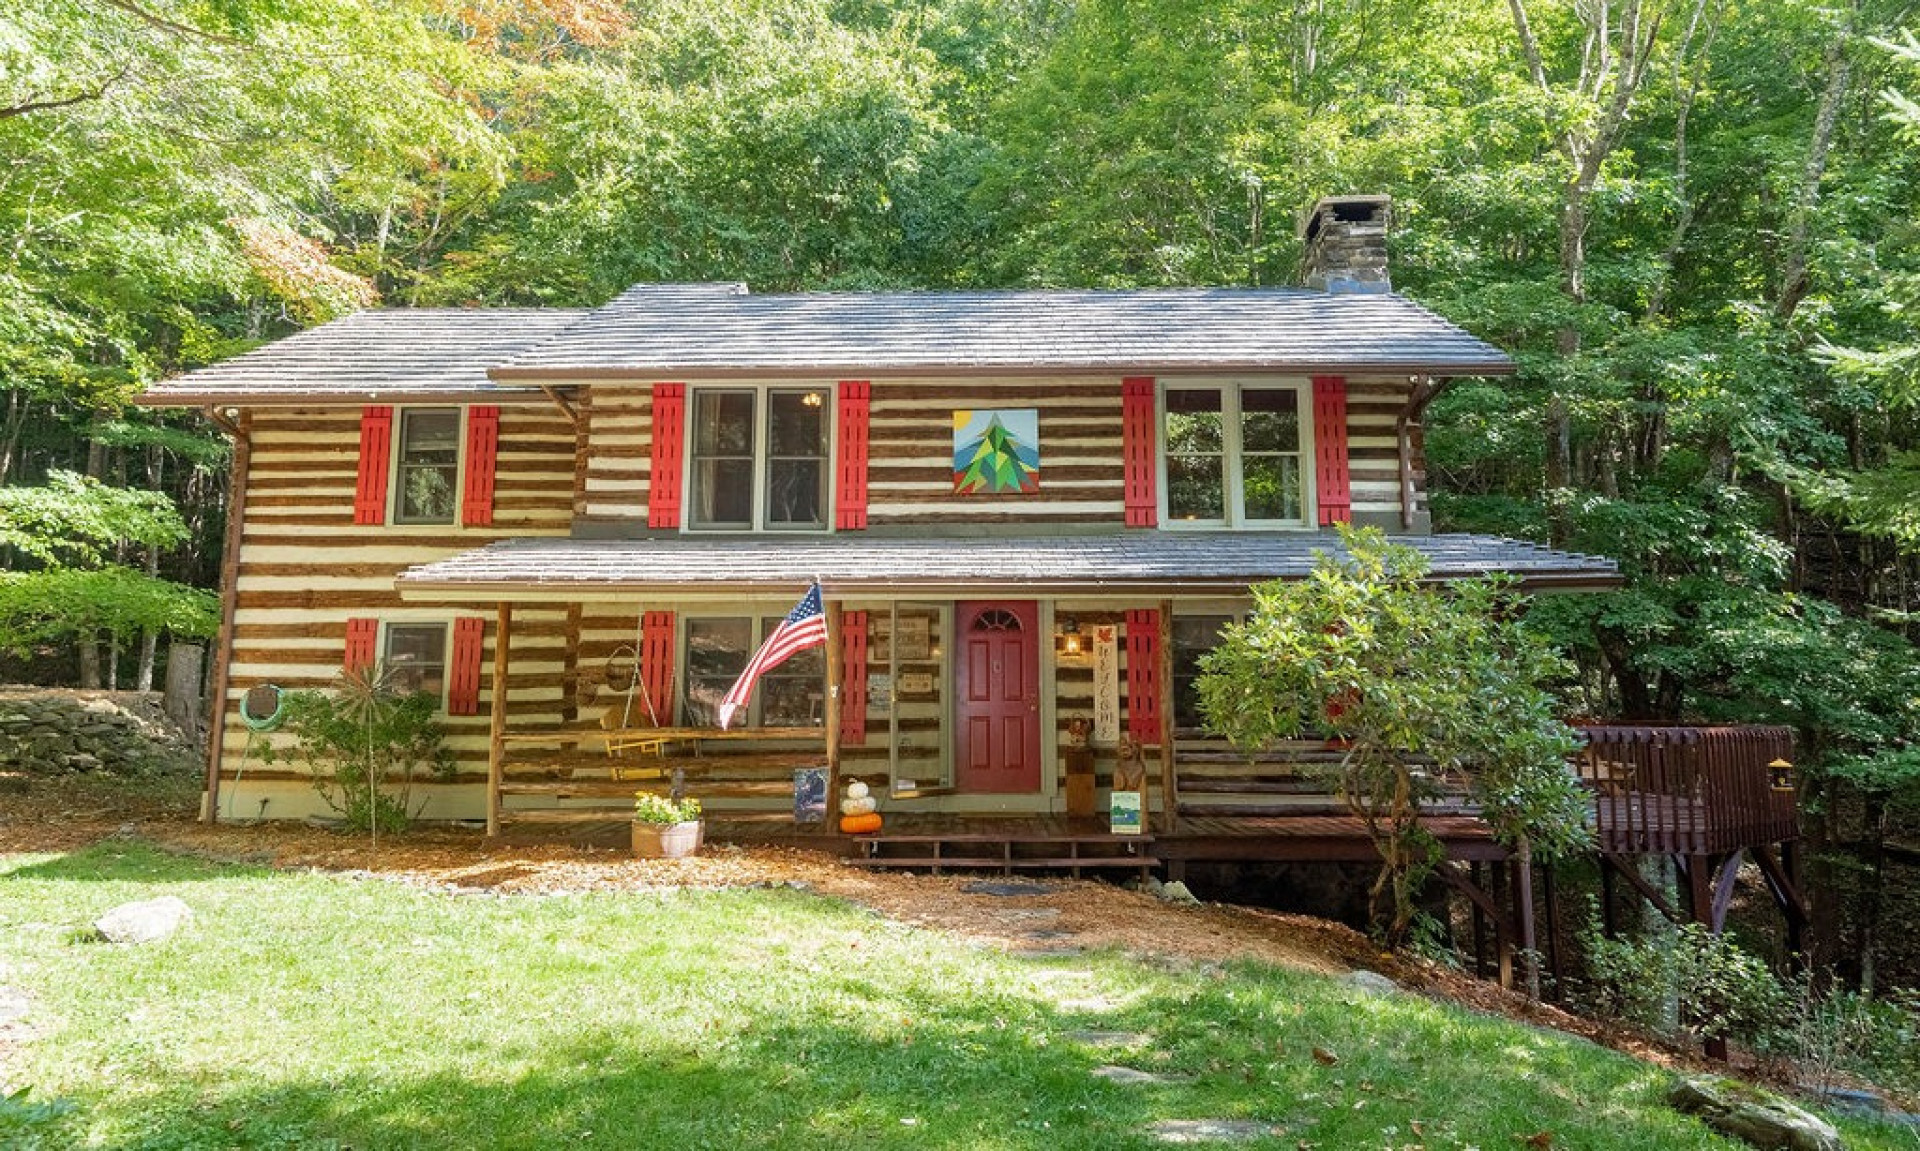 Welcome to your magnificent log cabin in Stonebridge, a highly sought after antique log home community located in the Todd area of Southern Ashe County high in the North Carolina Mountains!